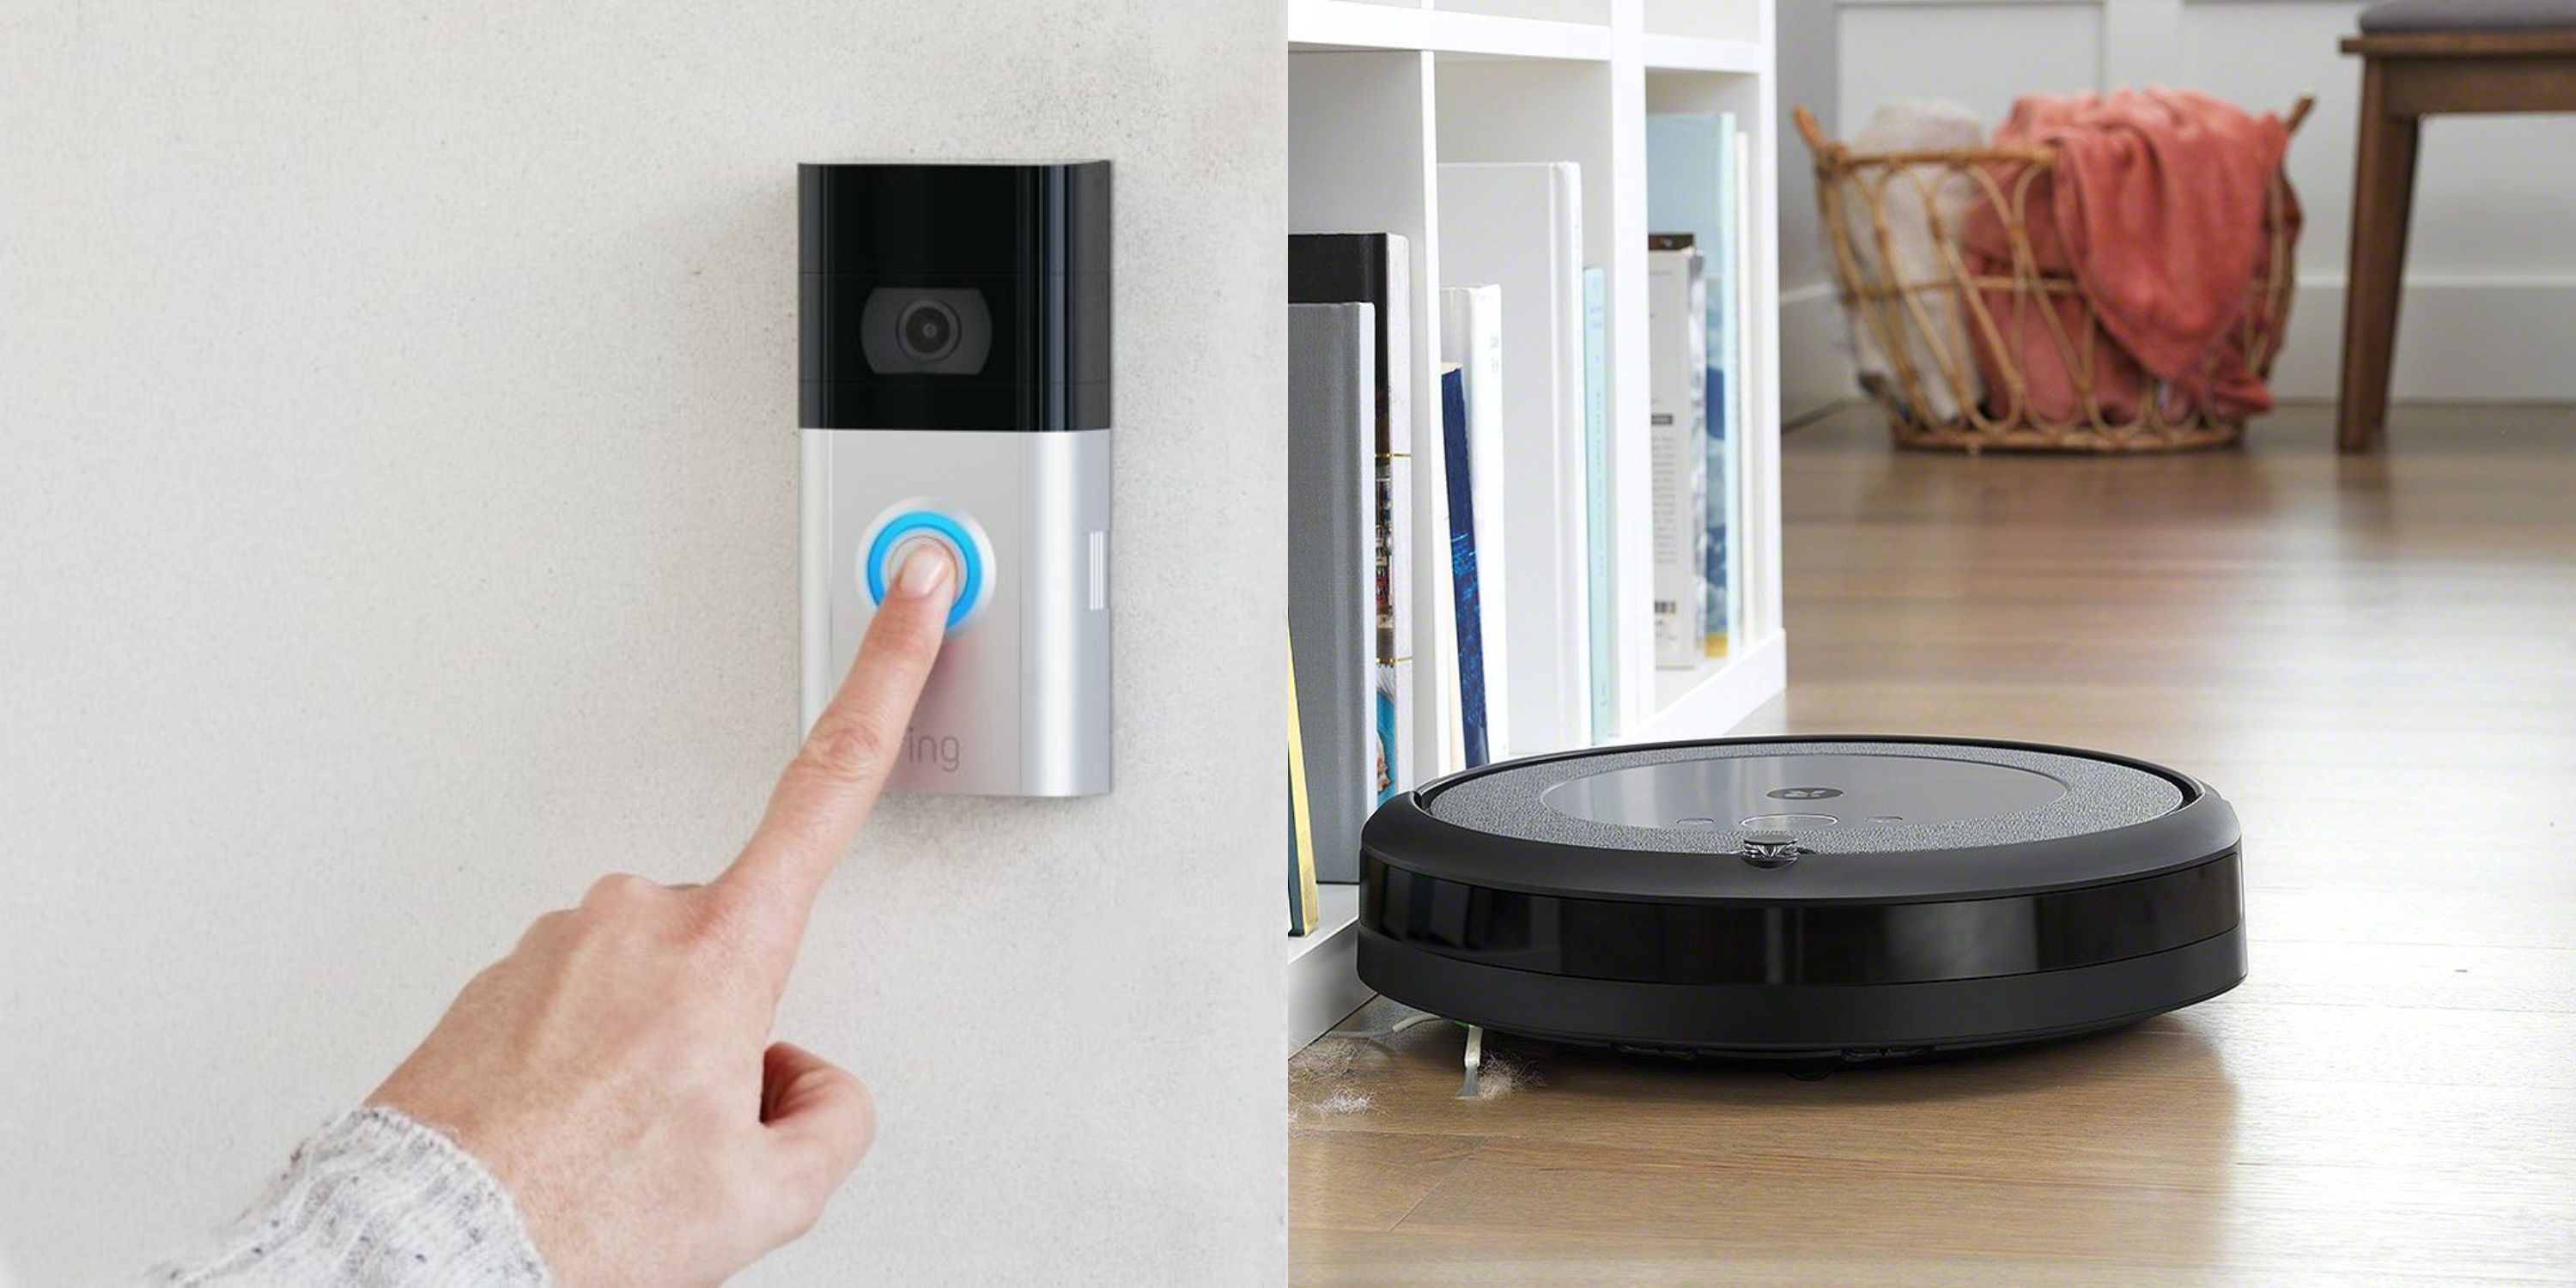 Featured image a finger pressing a Ring Smart doorbell and a roomba vacuuming a floor